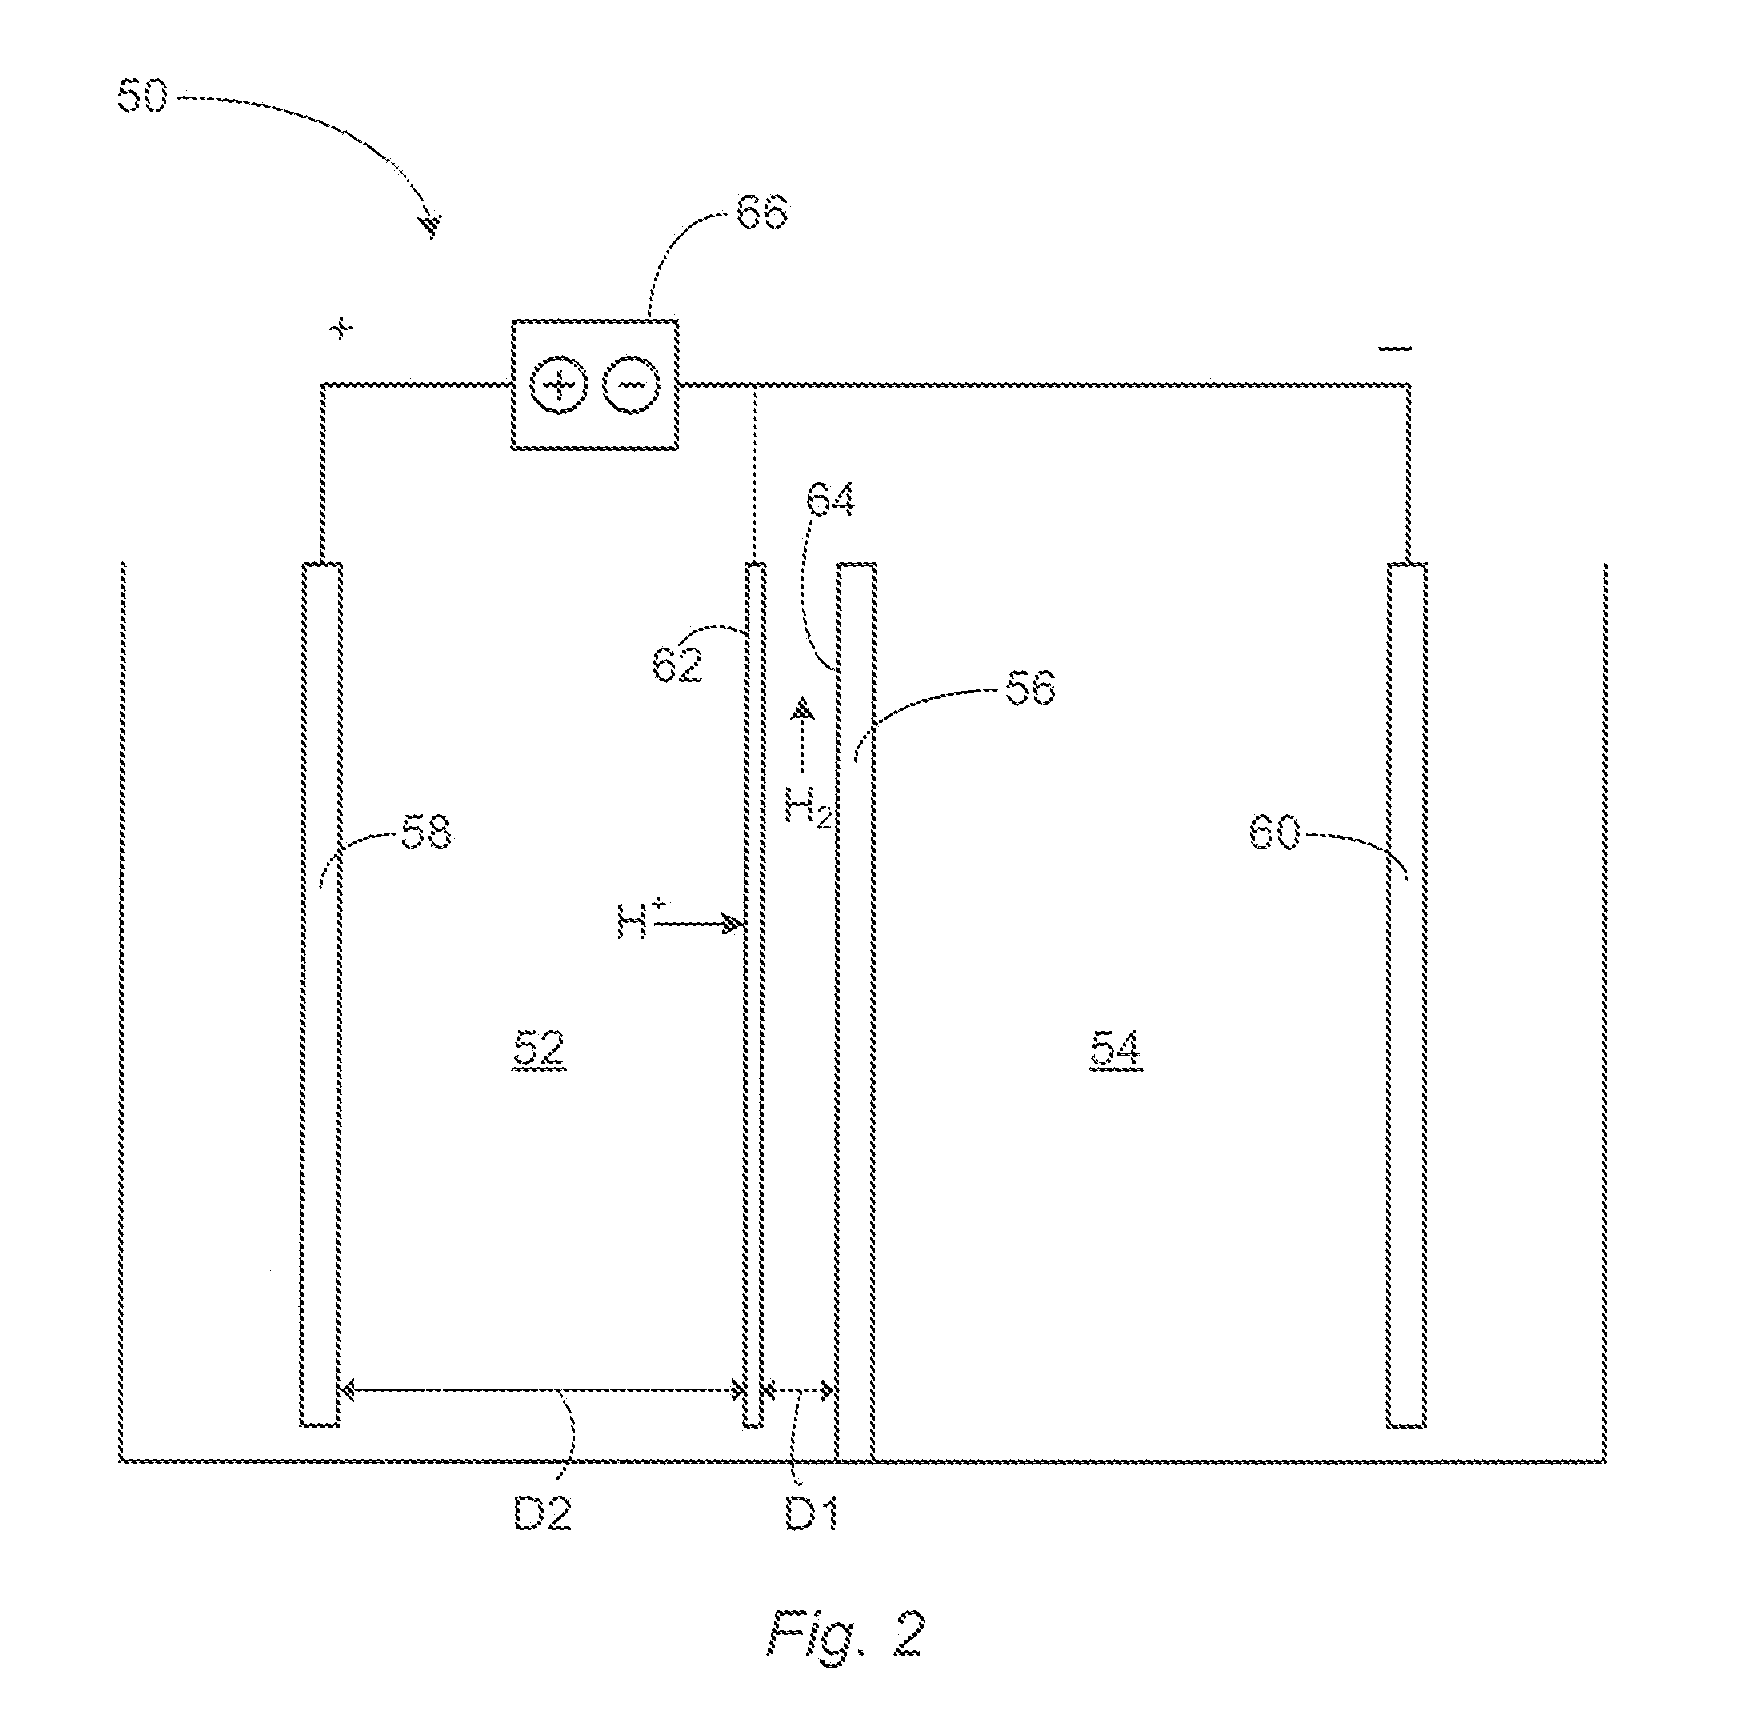 Electrochemical systems and methods for operating an electrochemical cell with an acidic anolyte